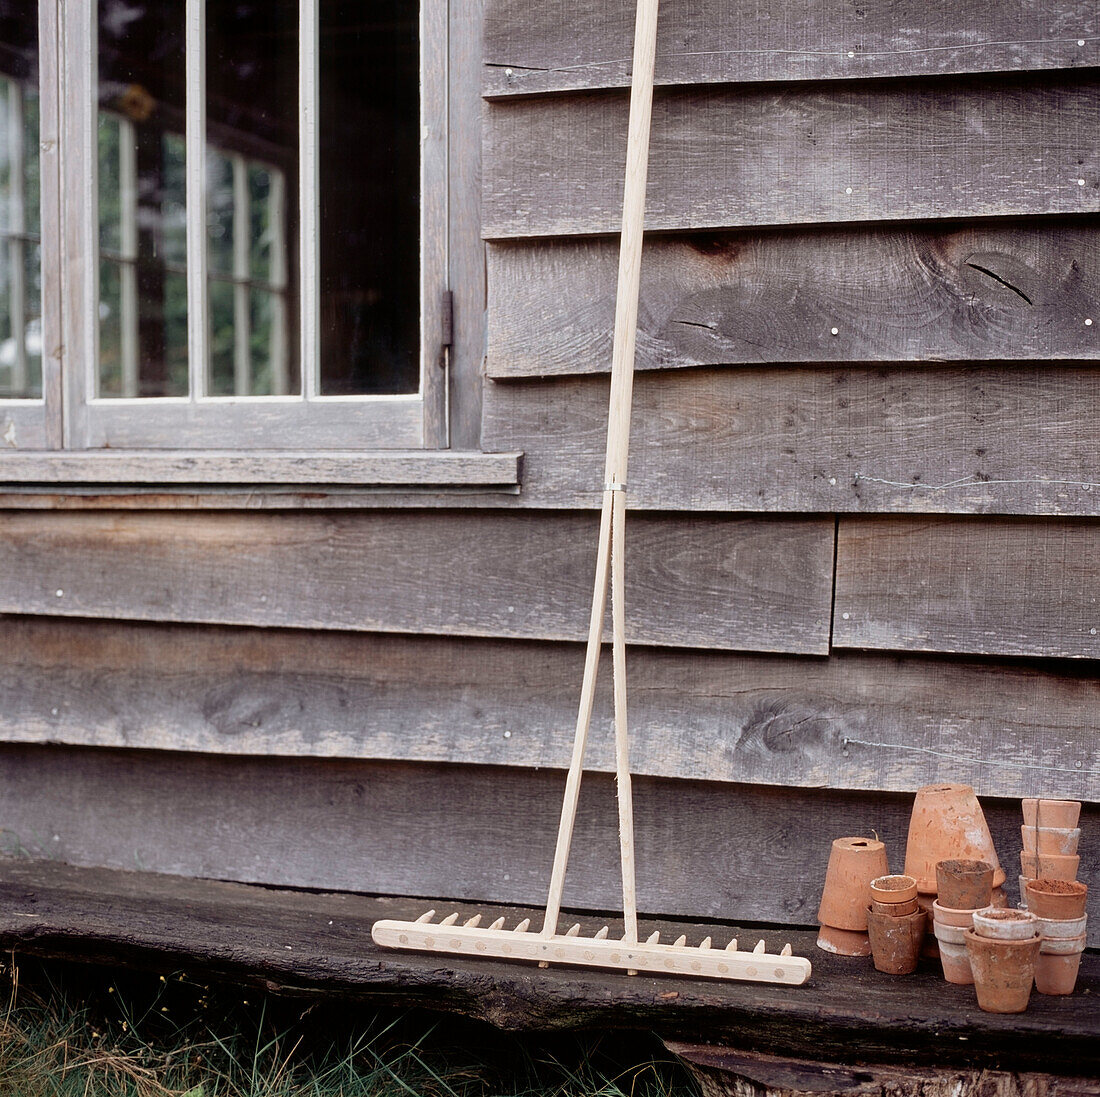 Detail of weather boarded house and gardening equipment